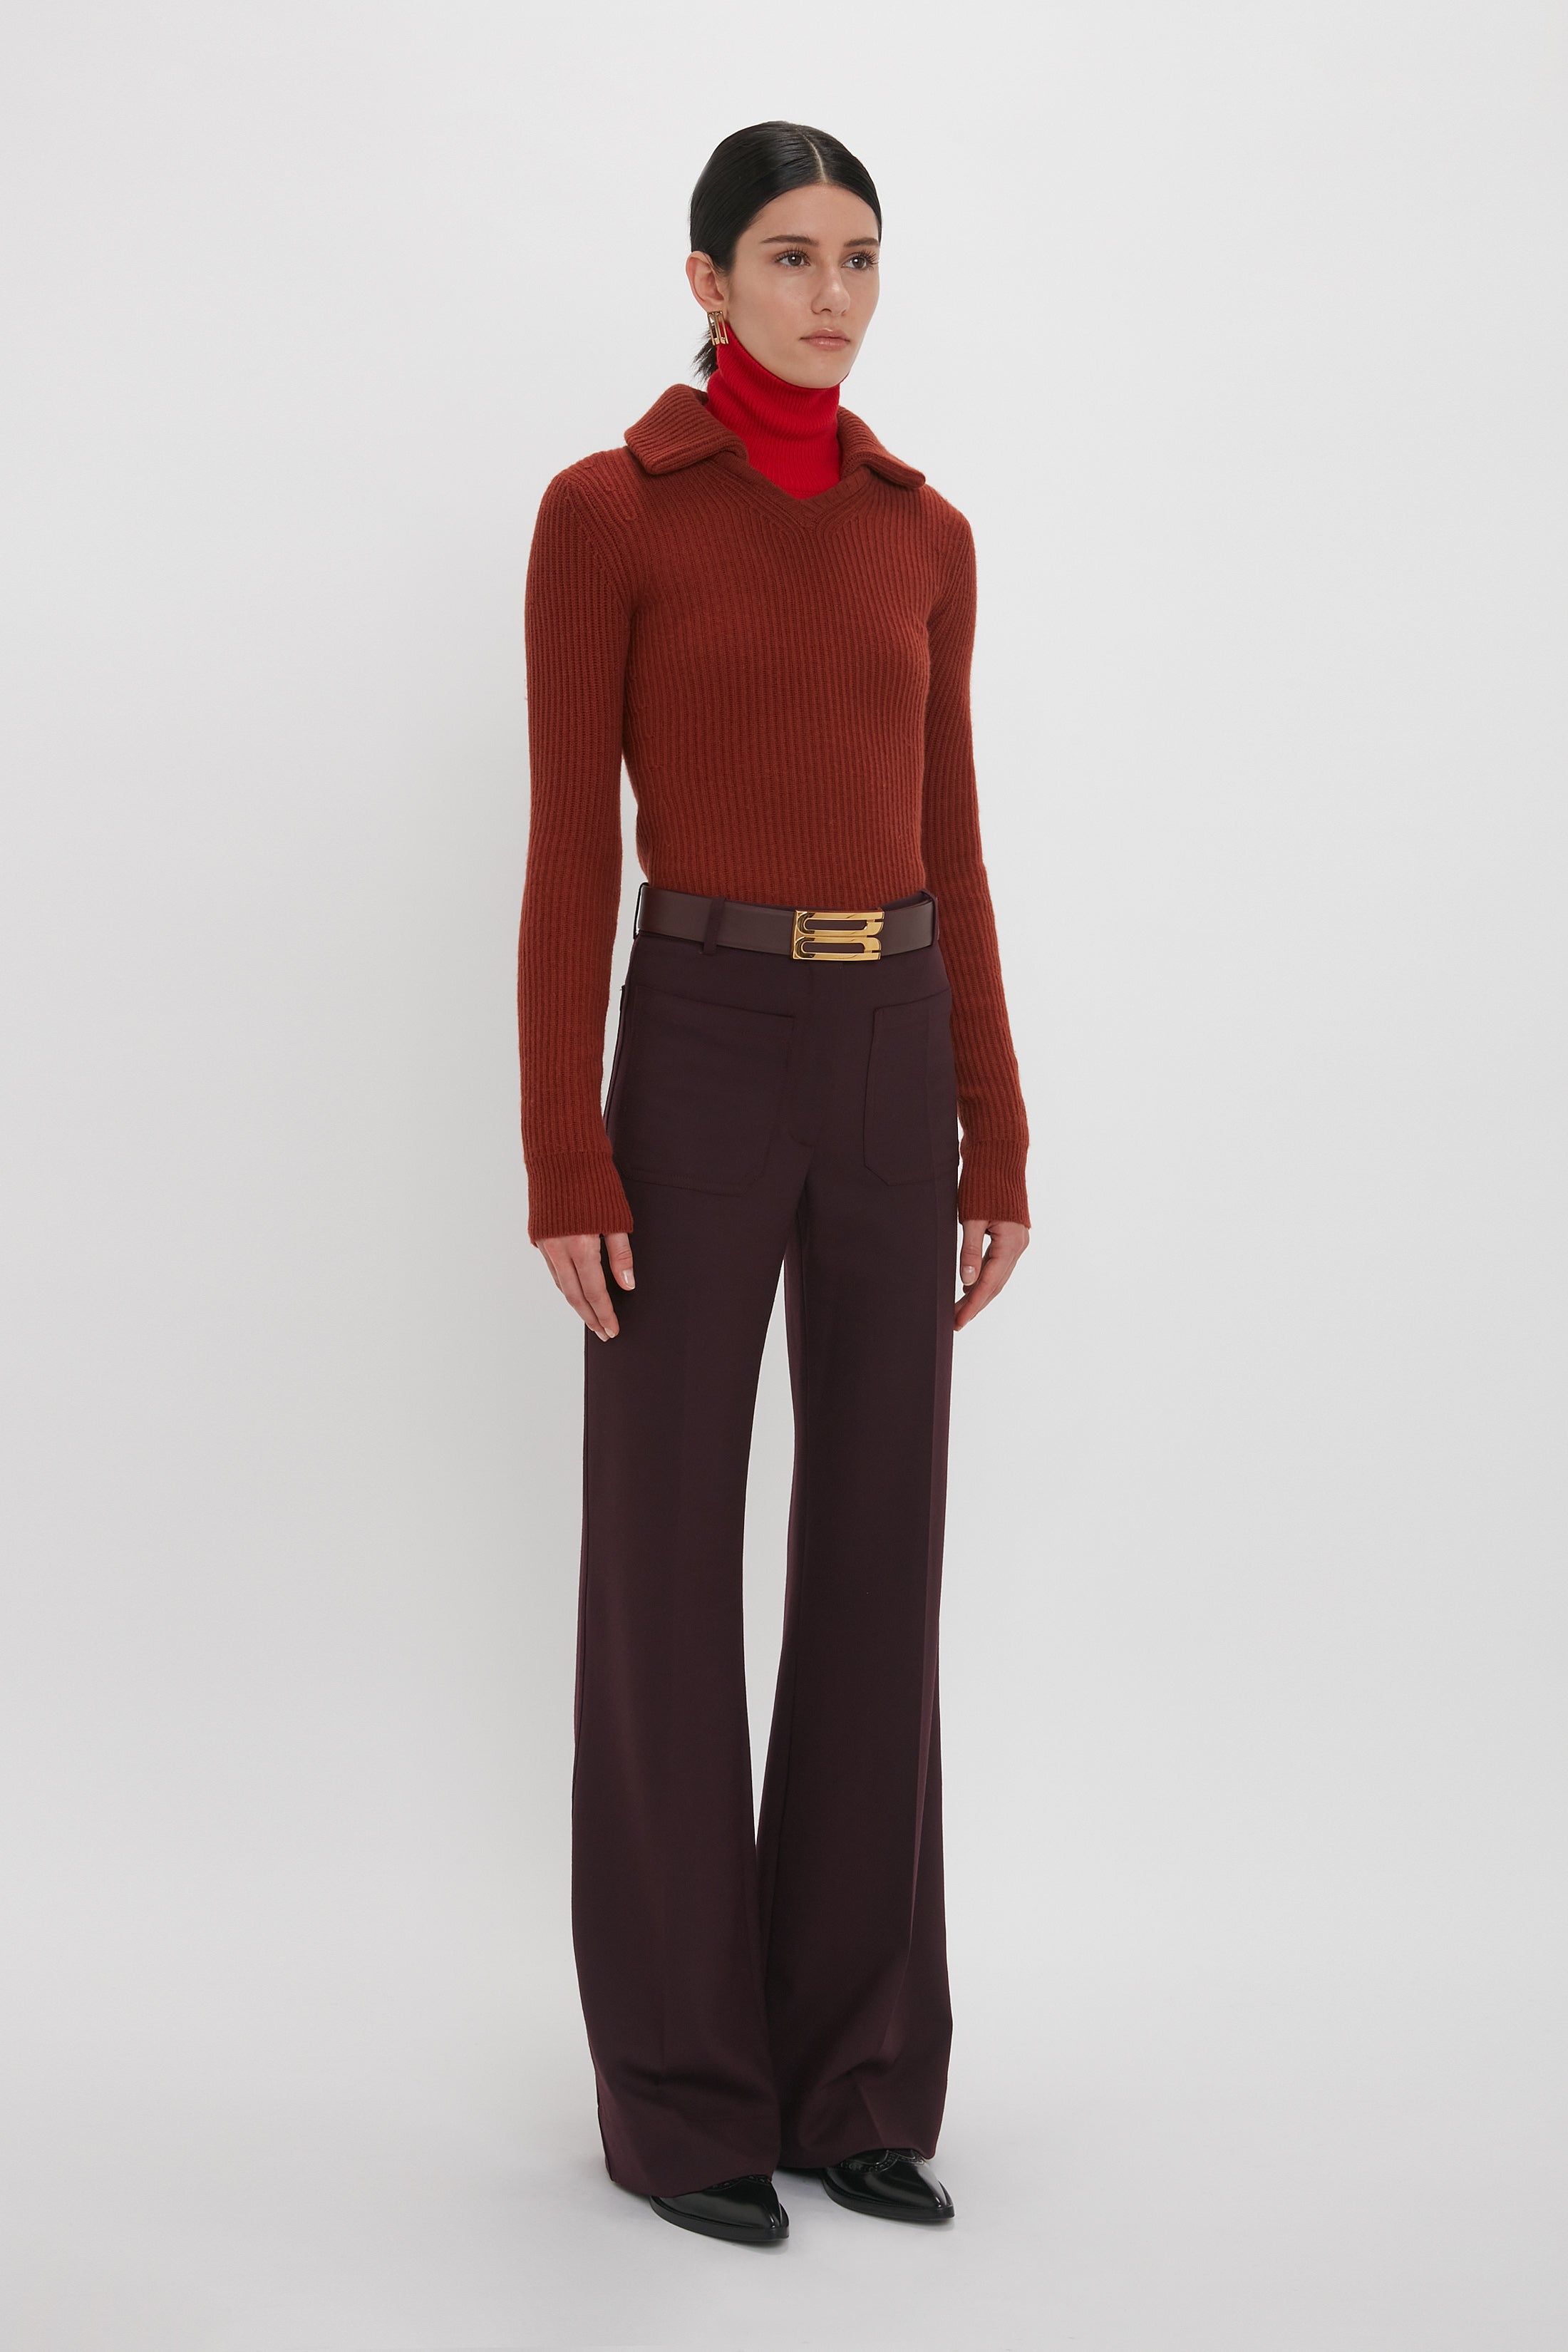 Double Collared Jumper In Russet - 4